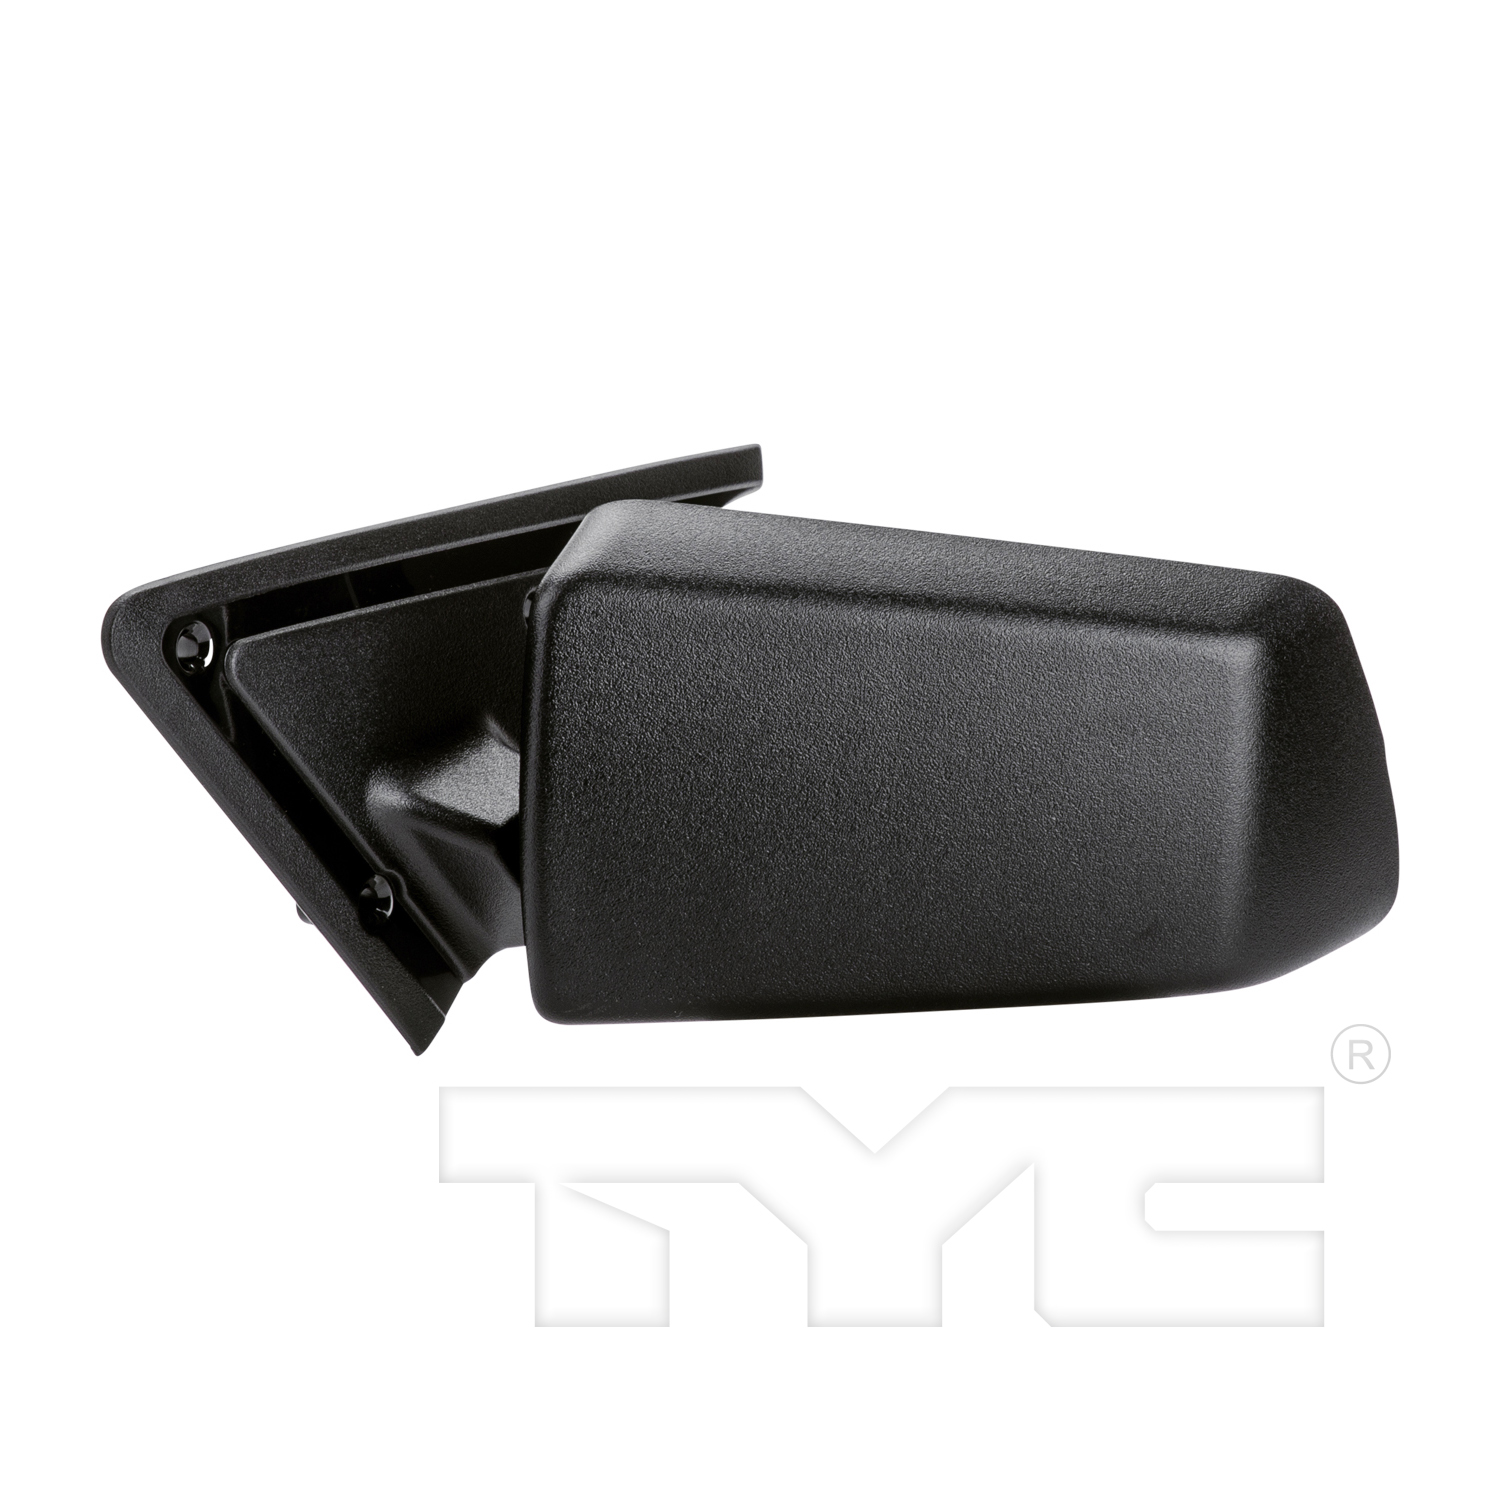 Aftermarket MIRRORS for GMC - S15 JIMMY, S15 JIMMY,85-91,LT Mirror outside rear view